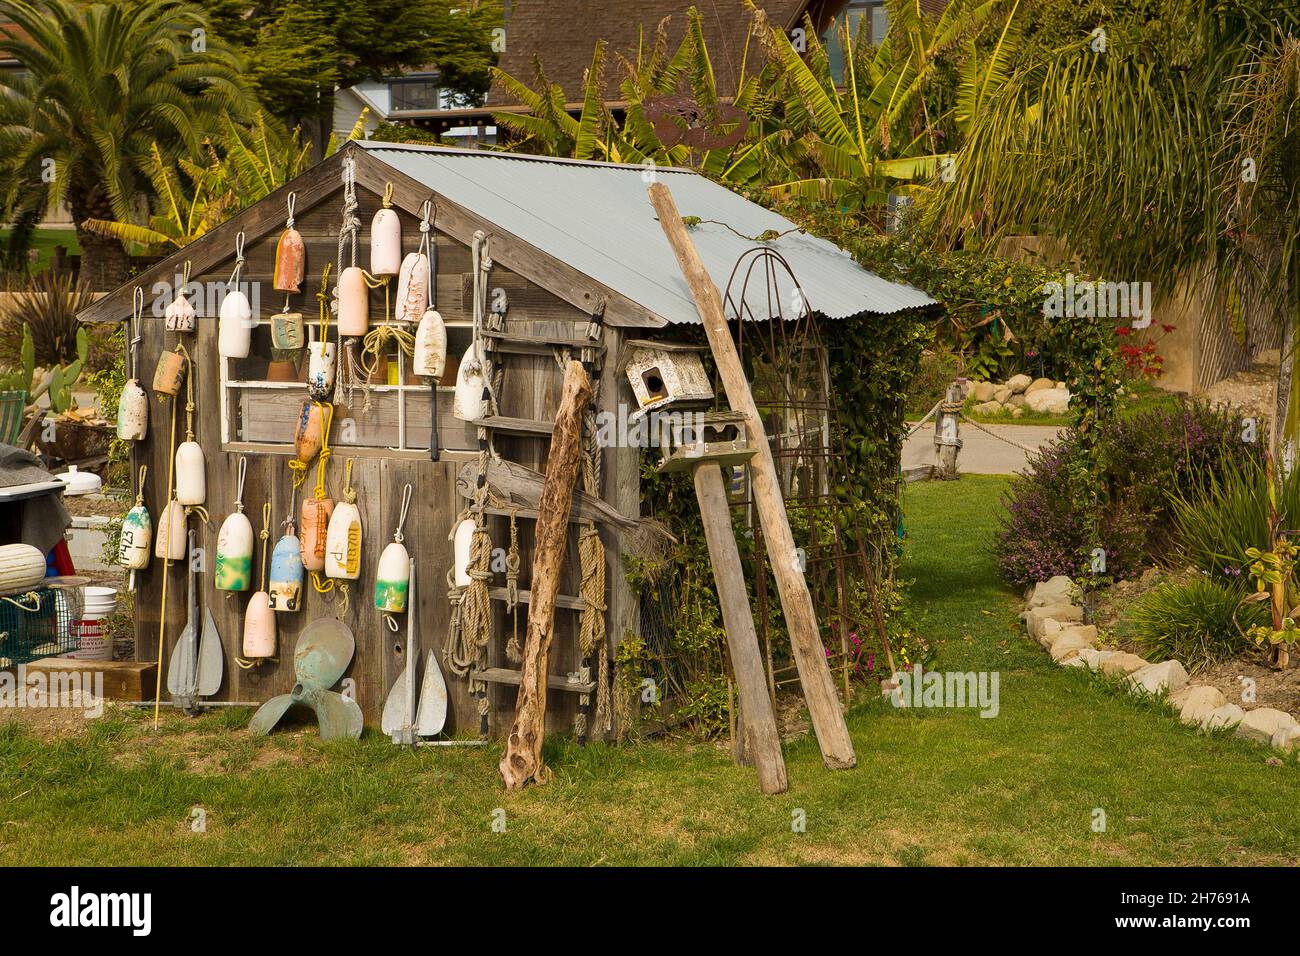 Many old buoys are hanging from the side of a wooden shed. Stock Photo